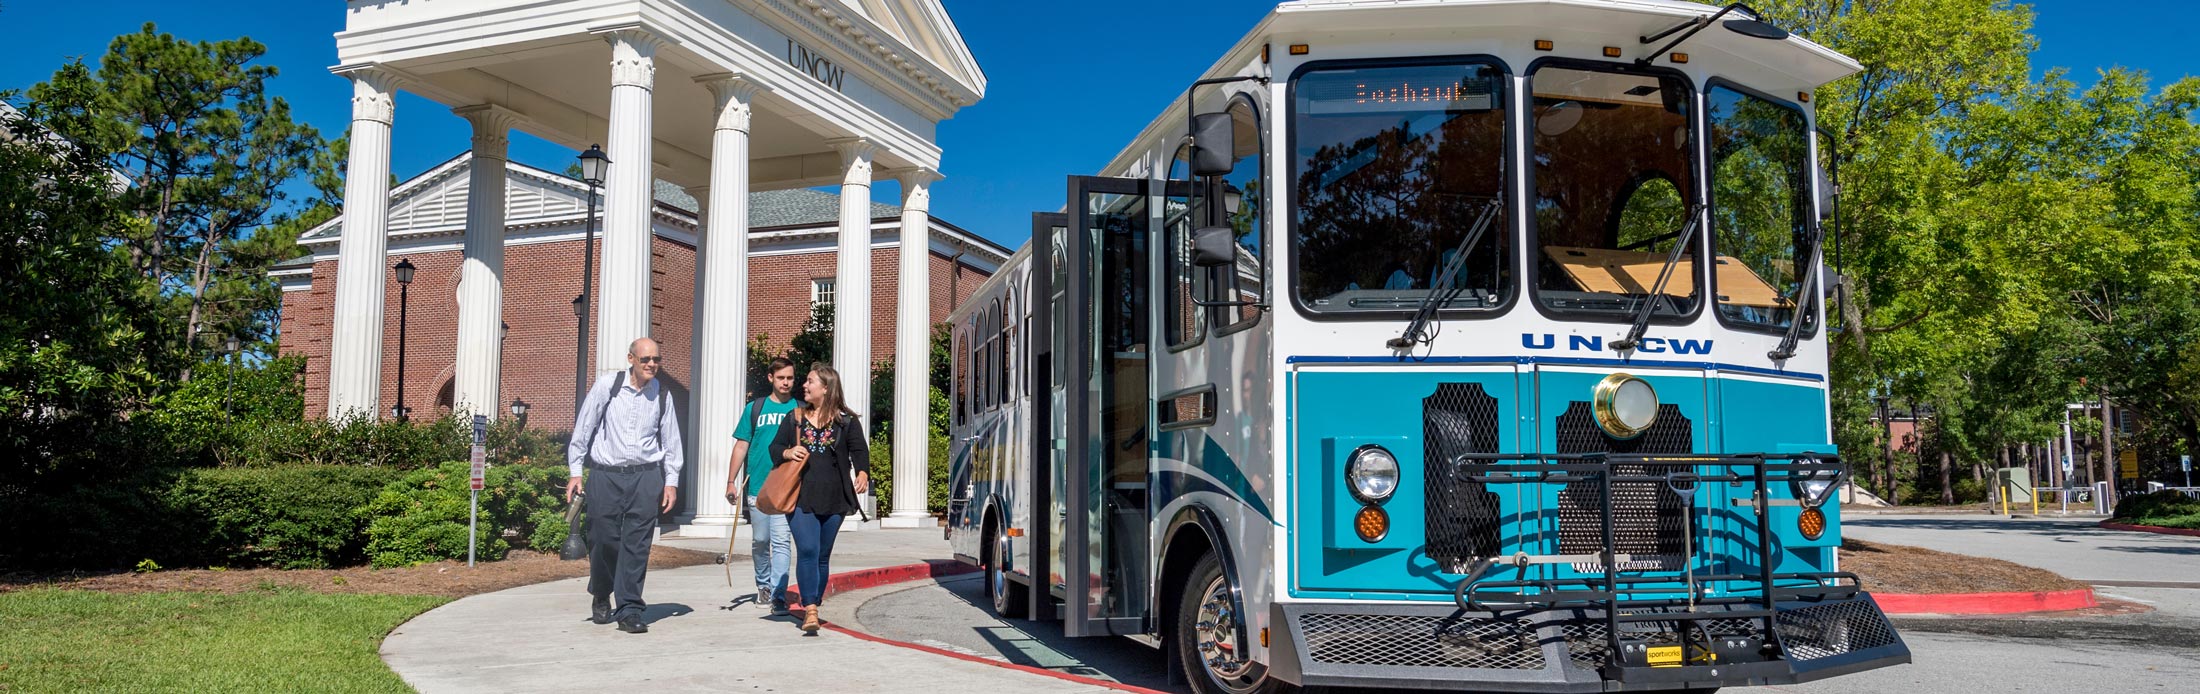 students boarding trolley in front of the UNCW columns